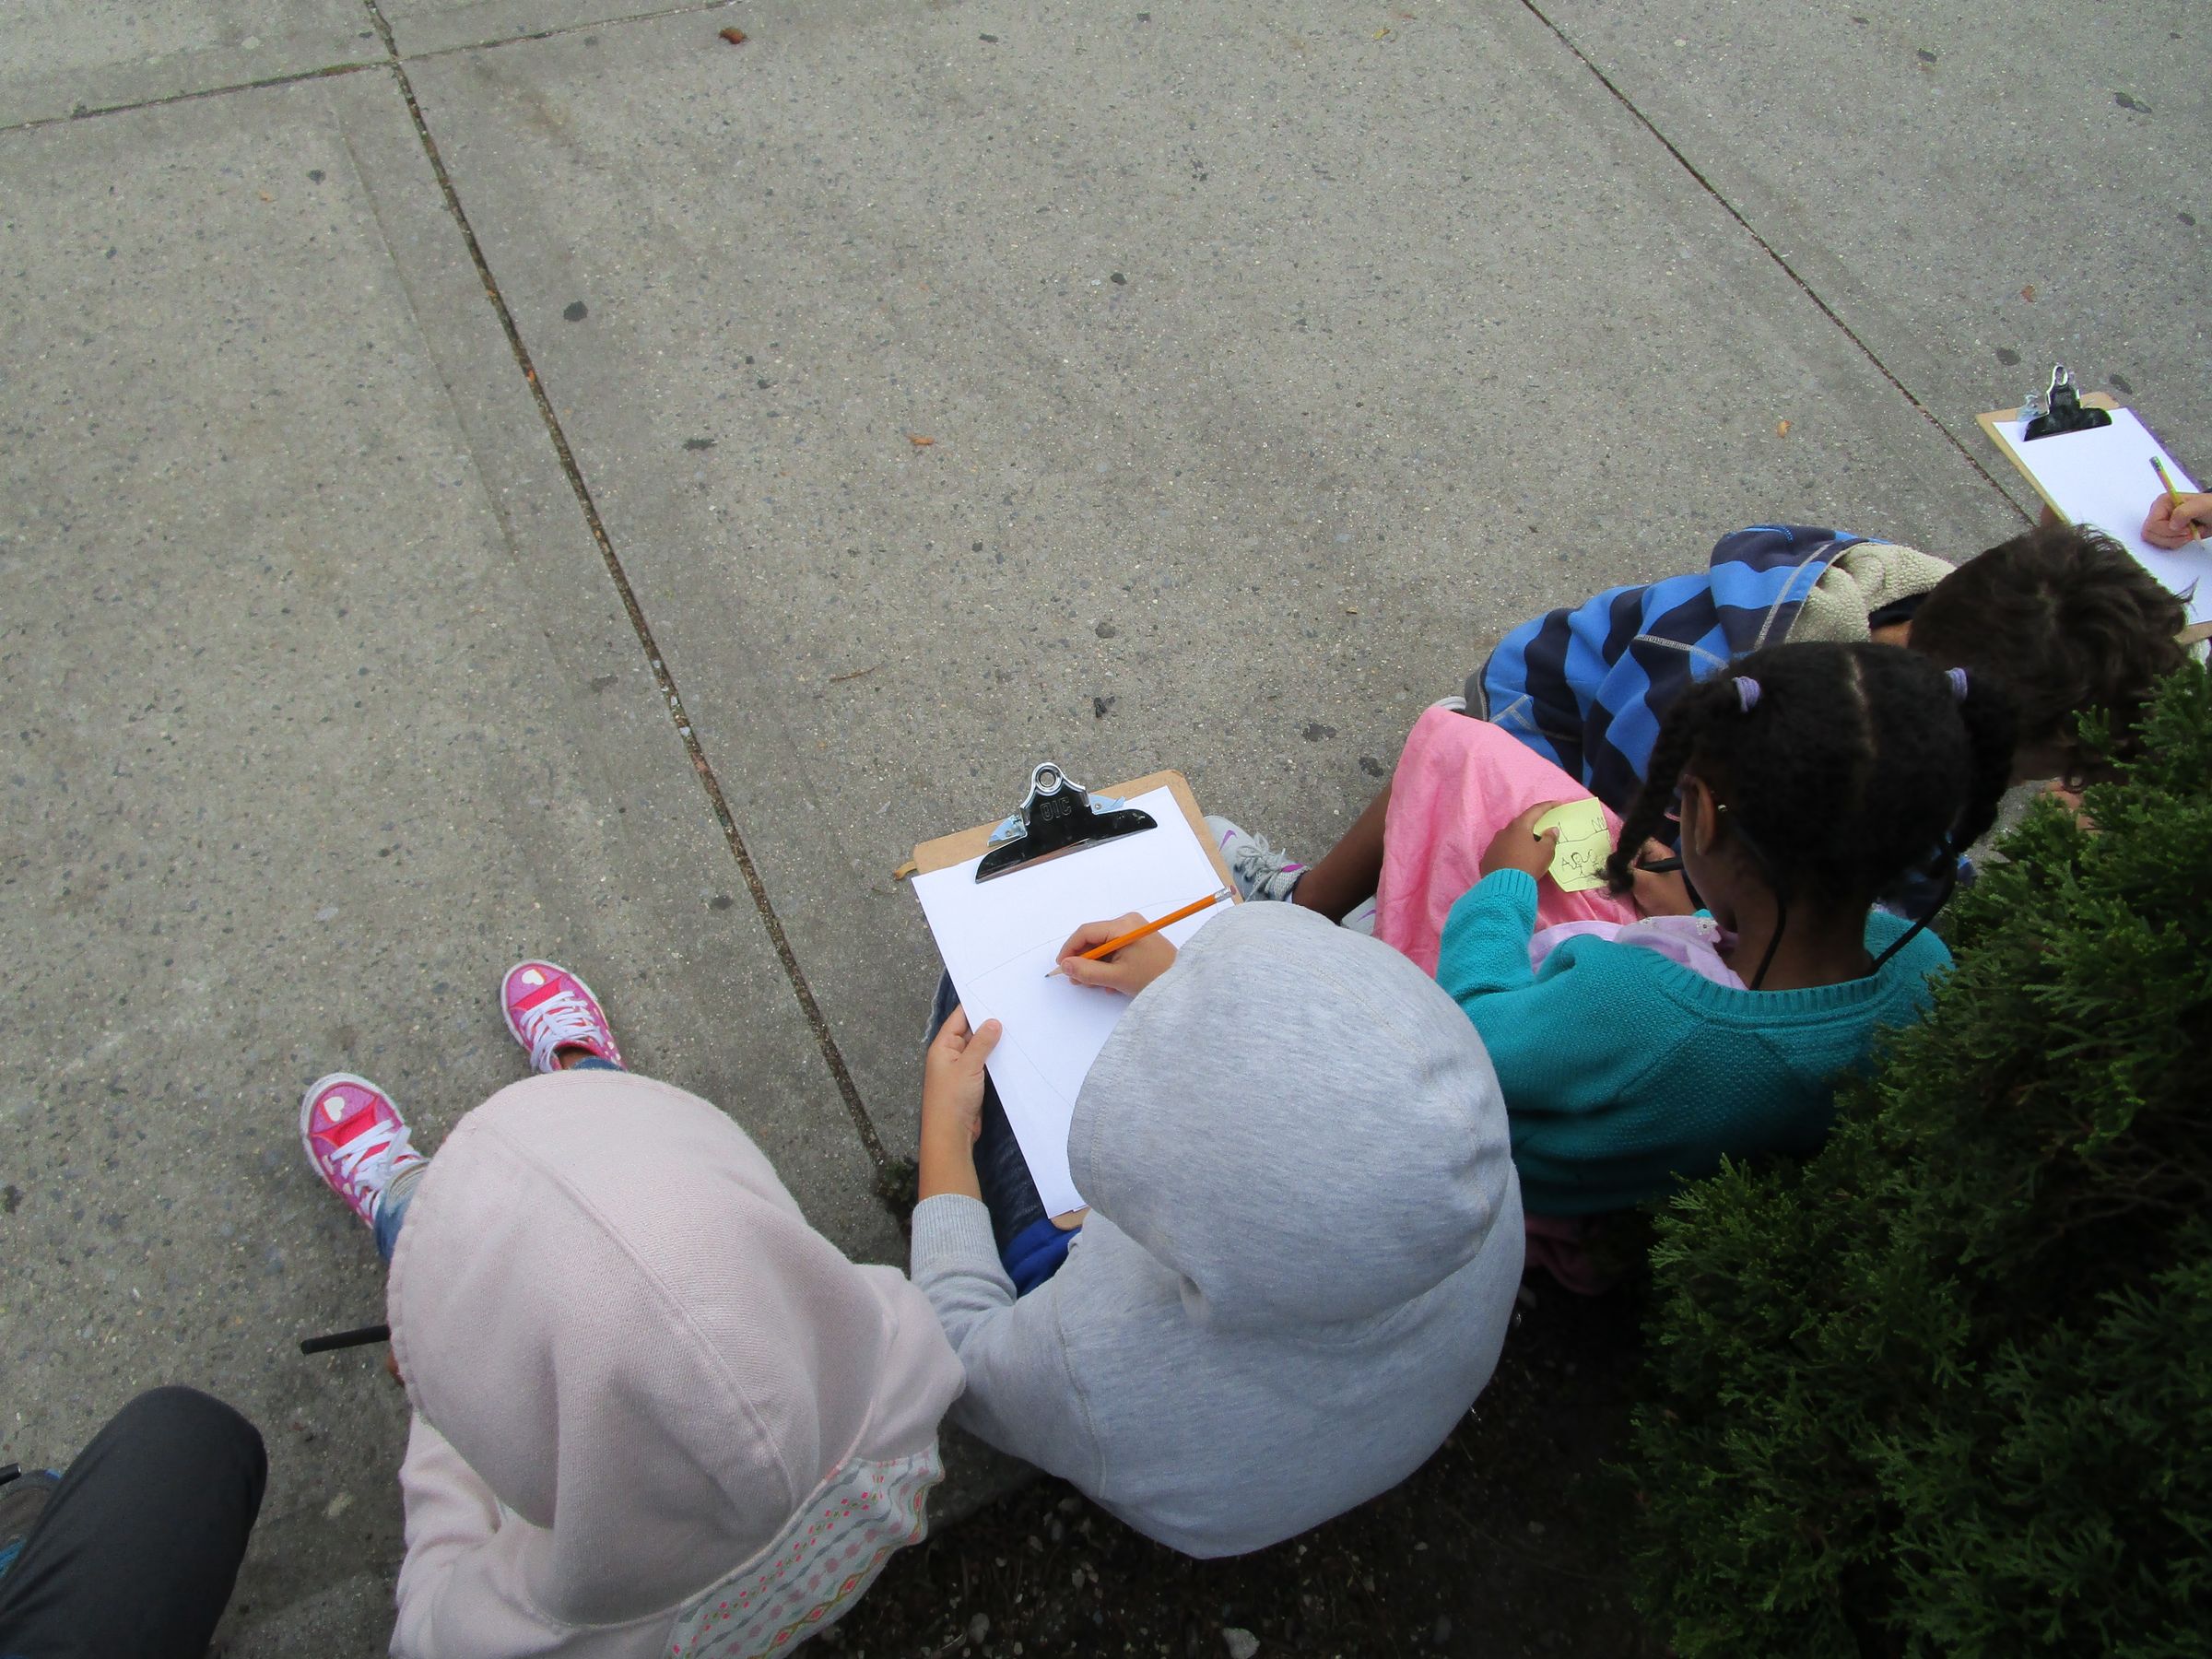 A birds-eye photograph of the top of four childrens heads who are seated on a concrete footpath writing on white paper attached to clipboards